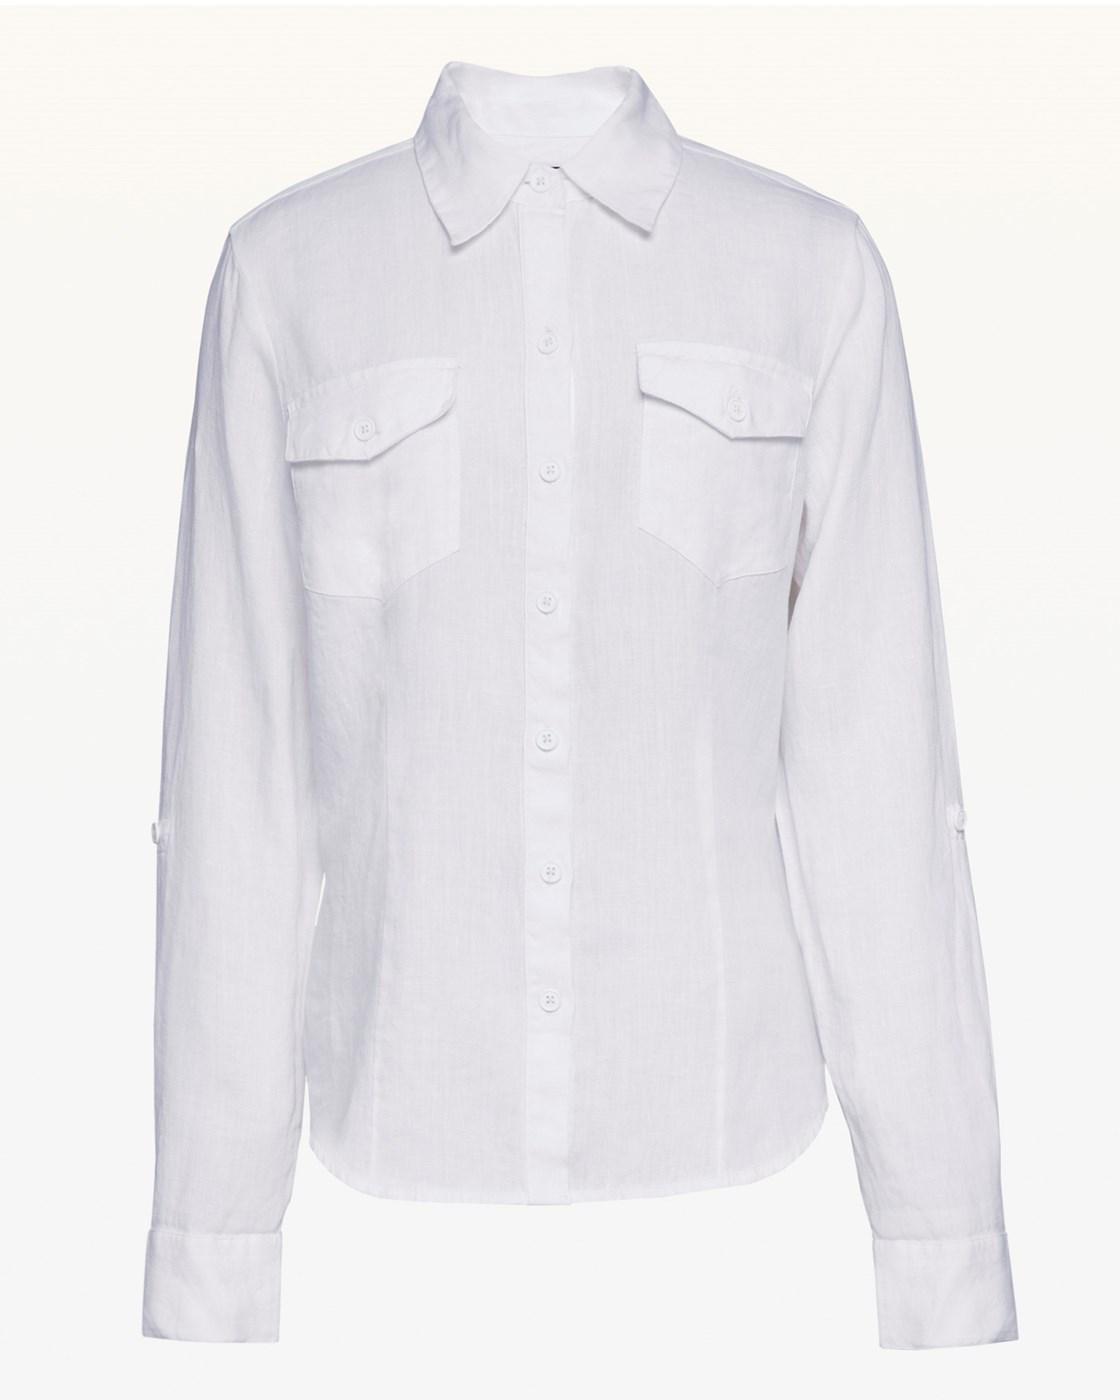 Juicy Couture Washed Linen Shirt